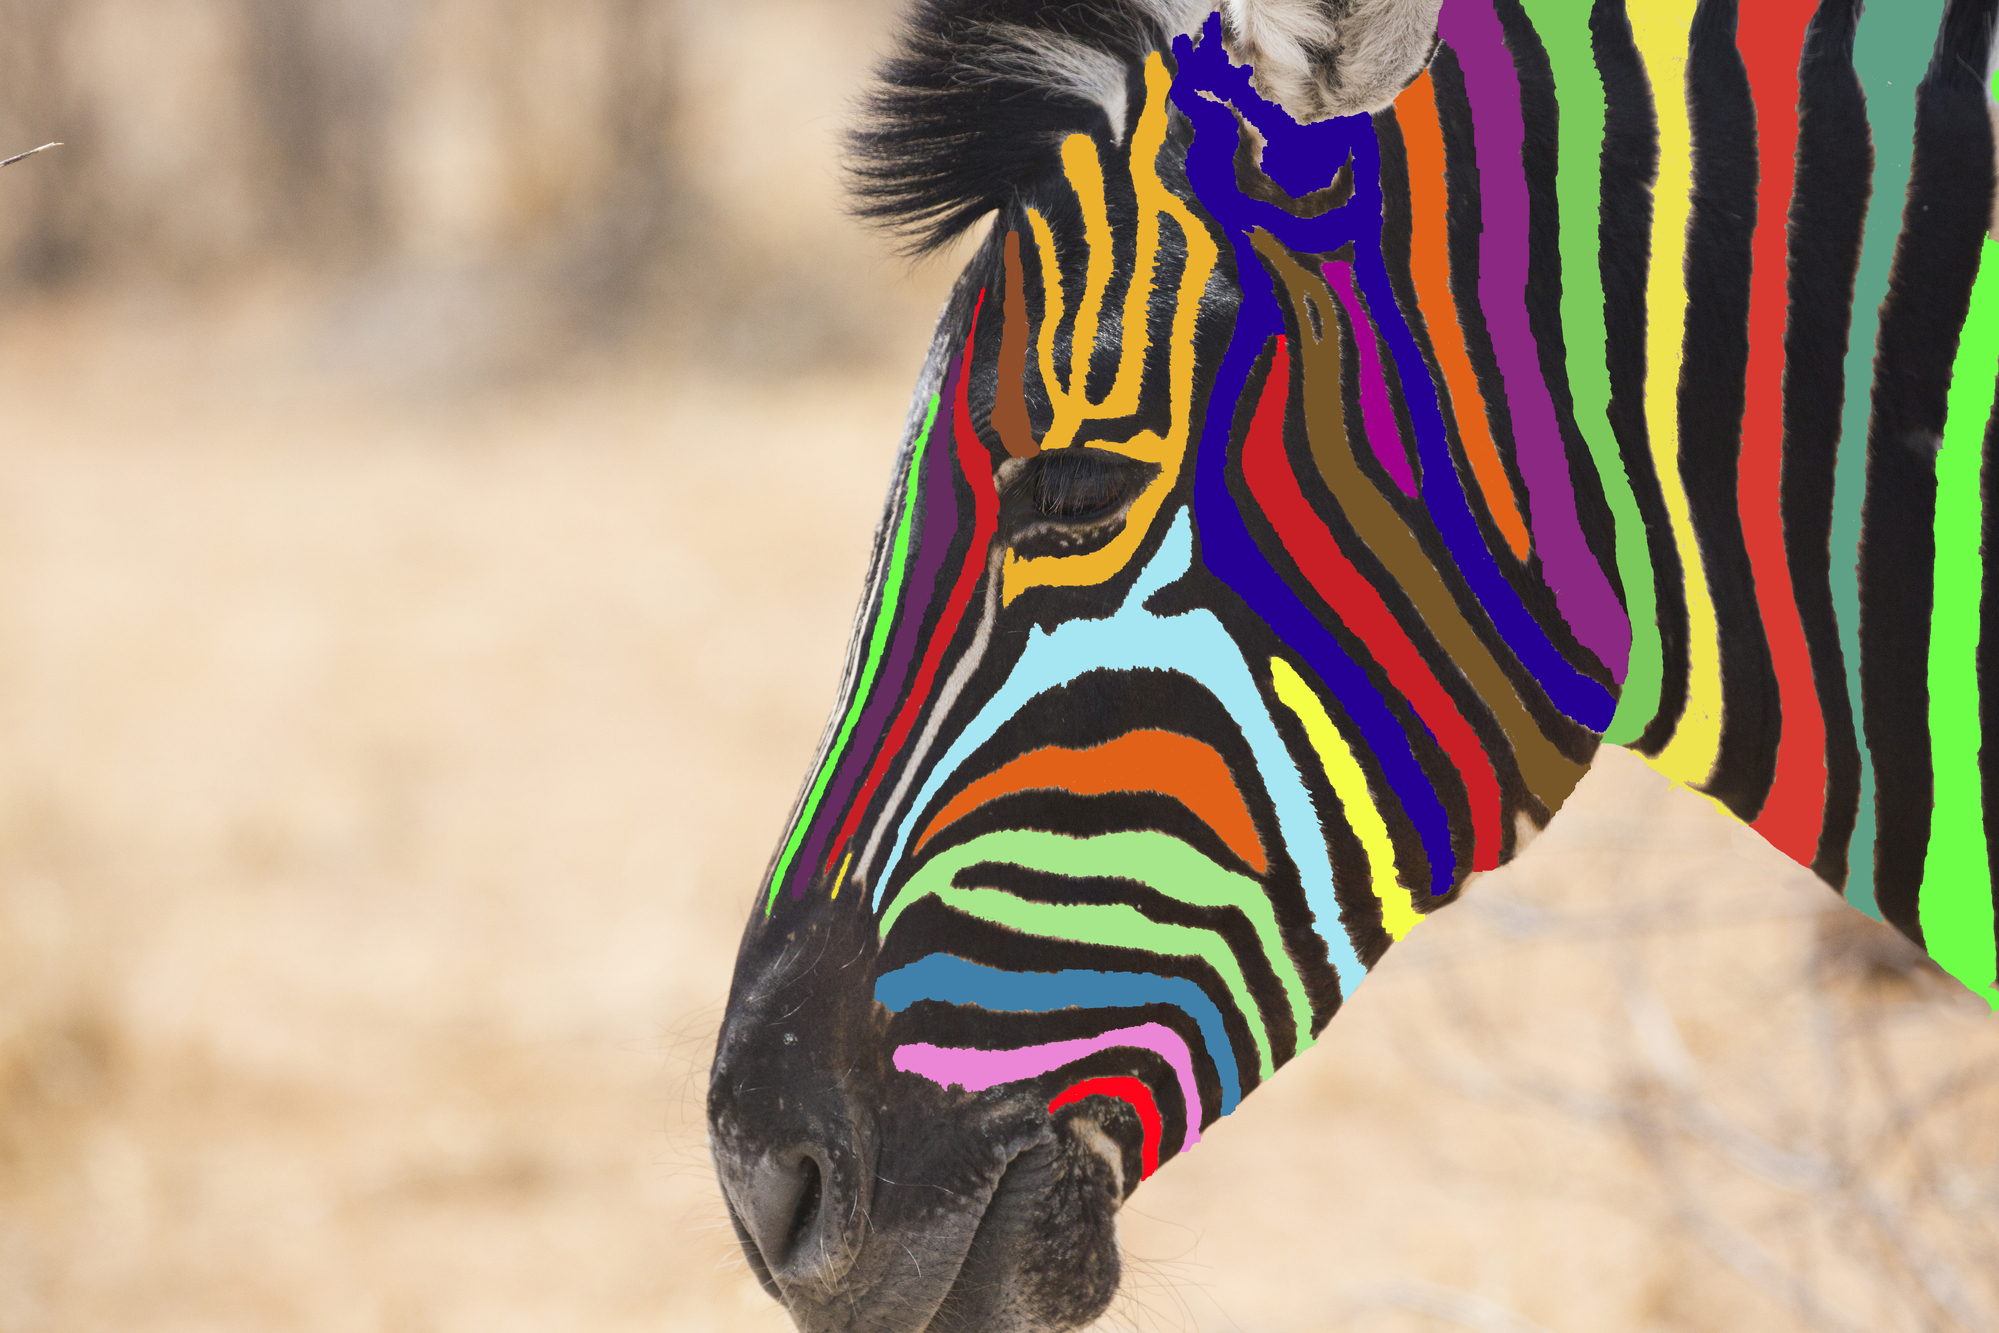 Seeing a colorful zebra is like expecting the unexpected.